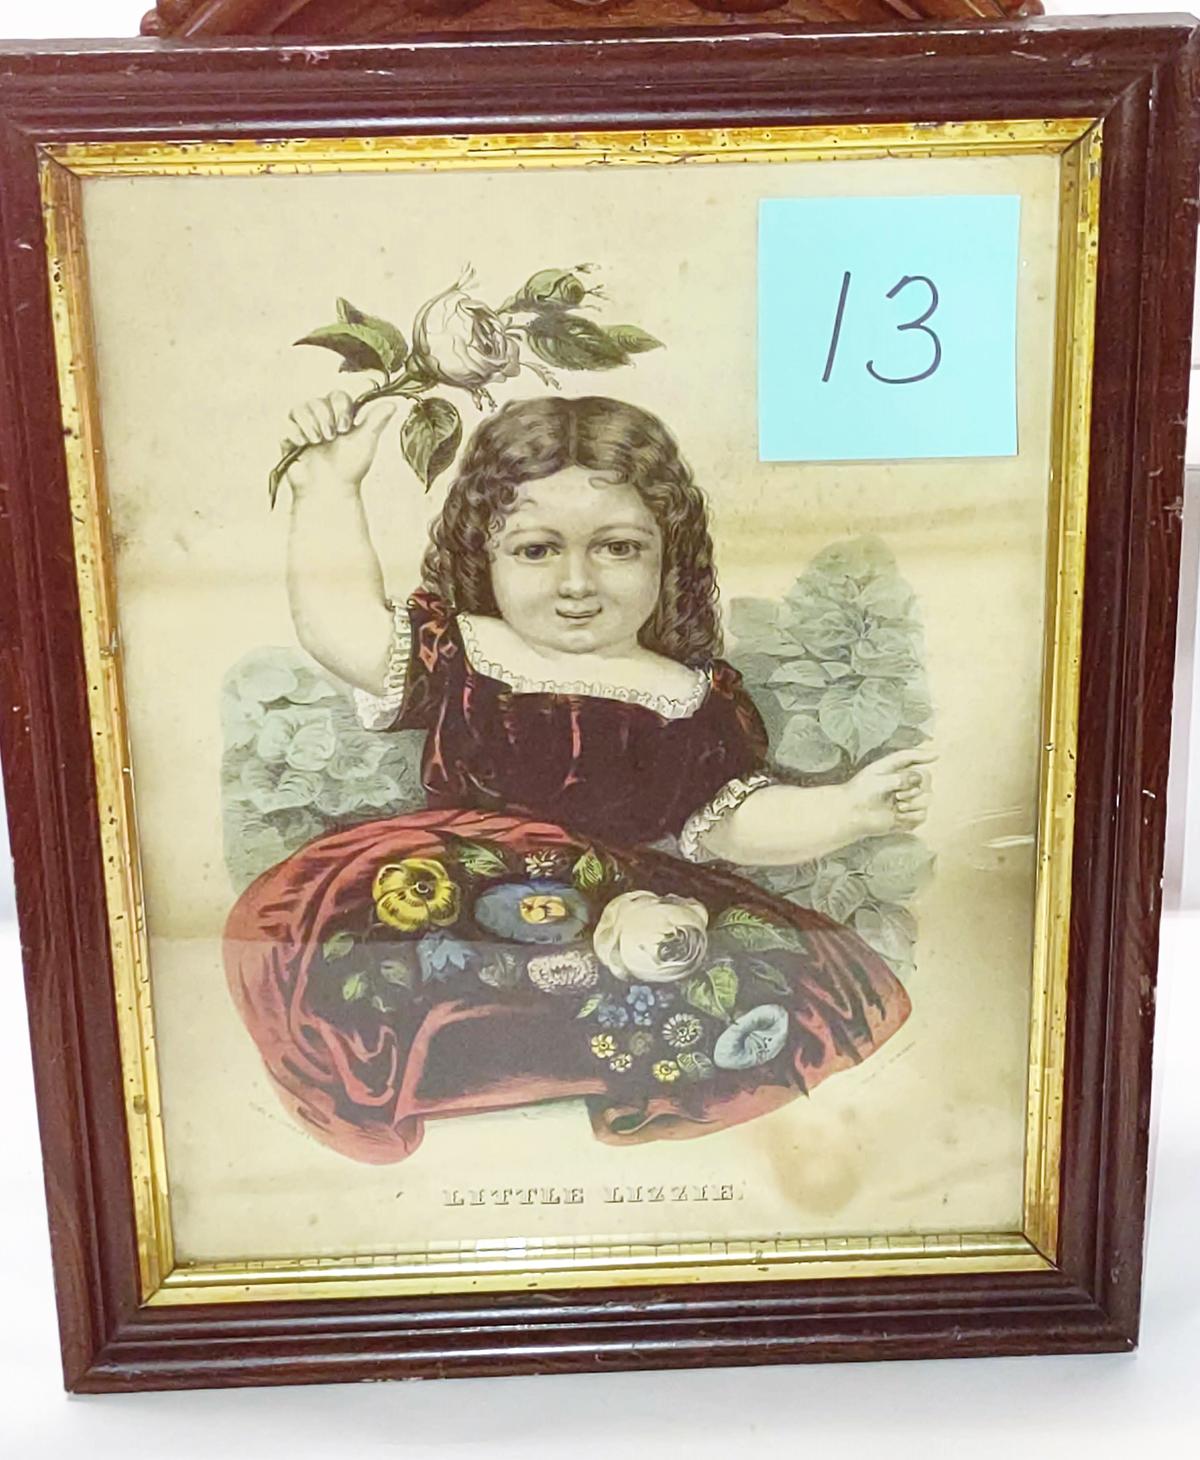 LITTLE LIZZIE CURRIER AND IVES (17X14)